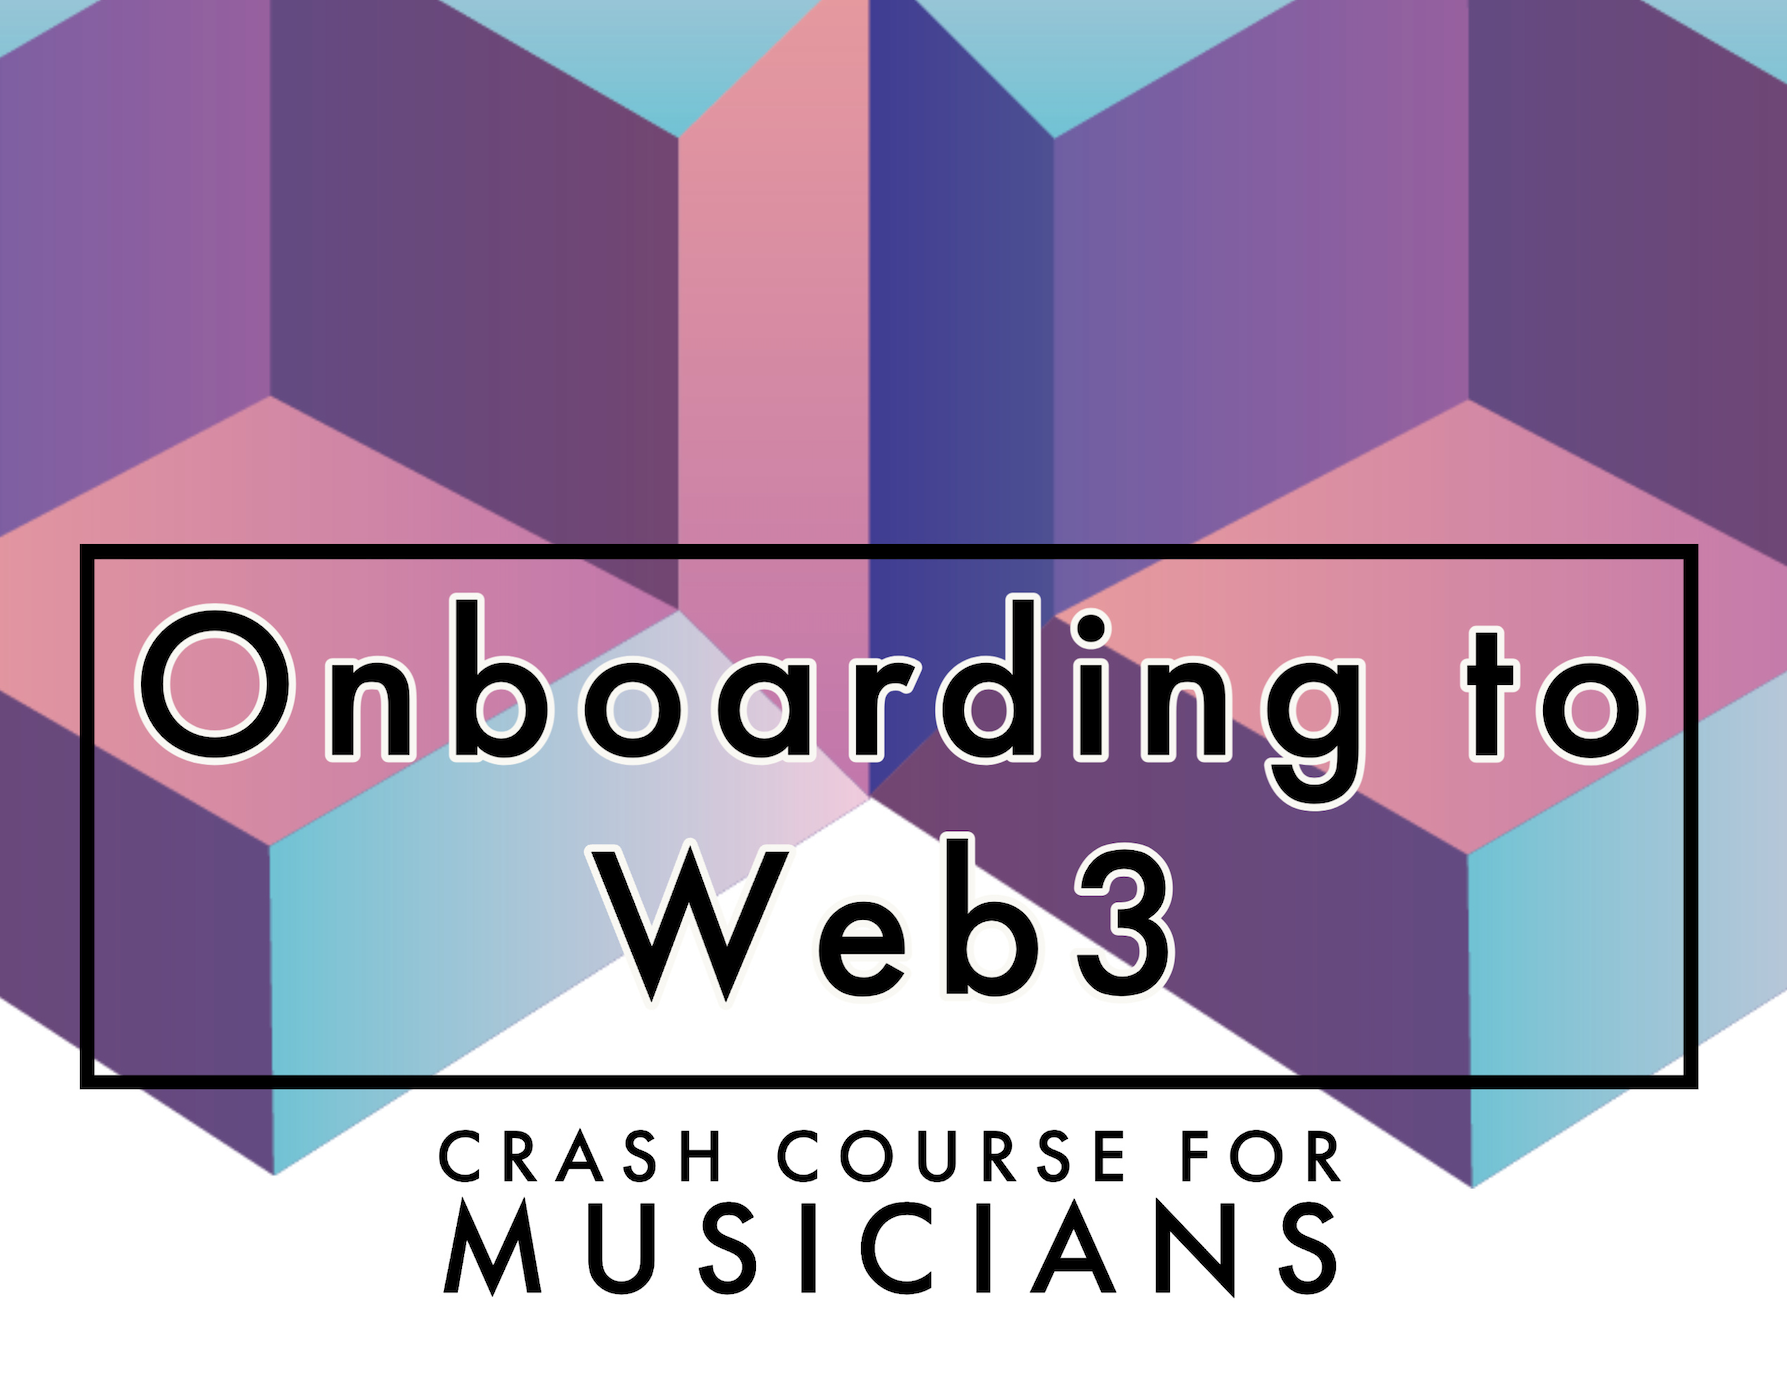 Onboarding to Web3.0 Crash Course for Musicians